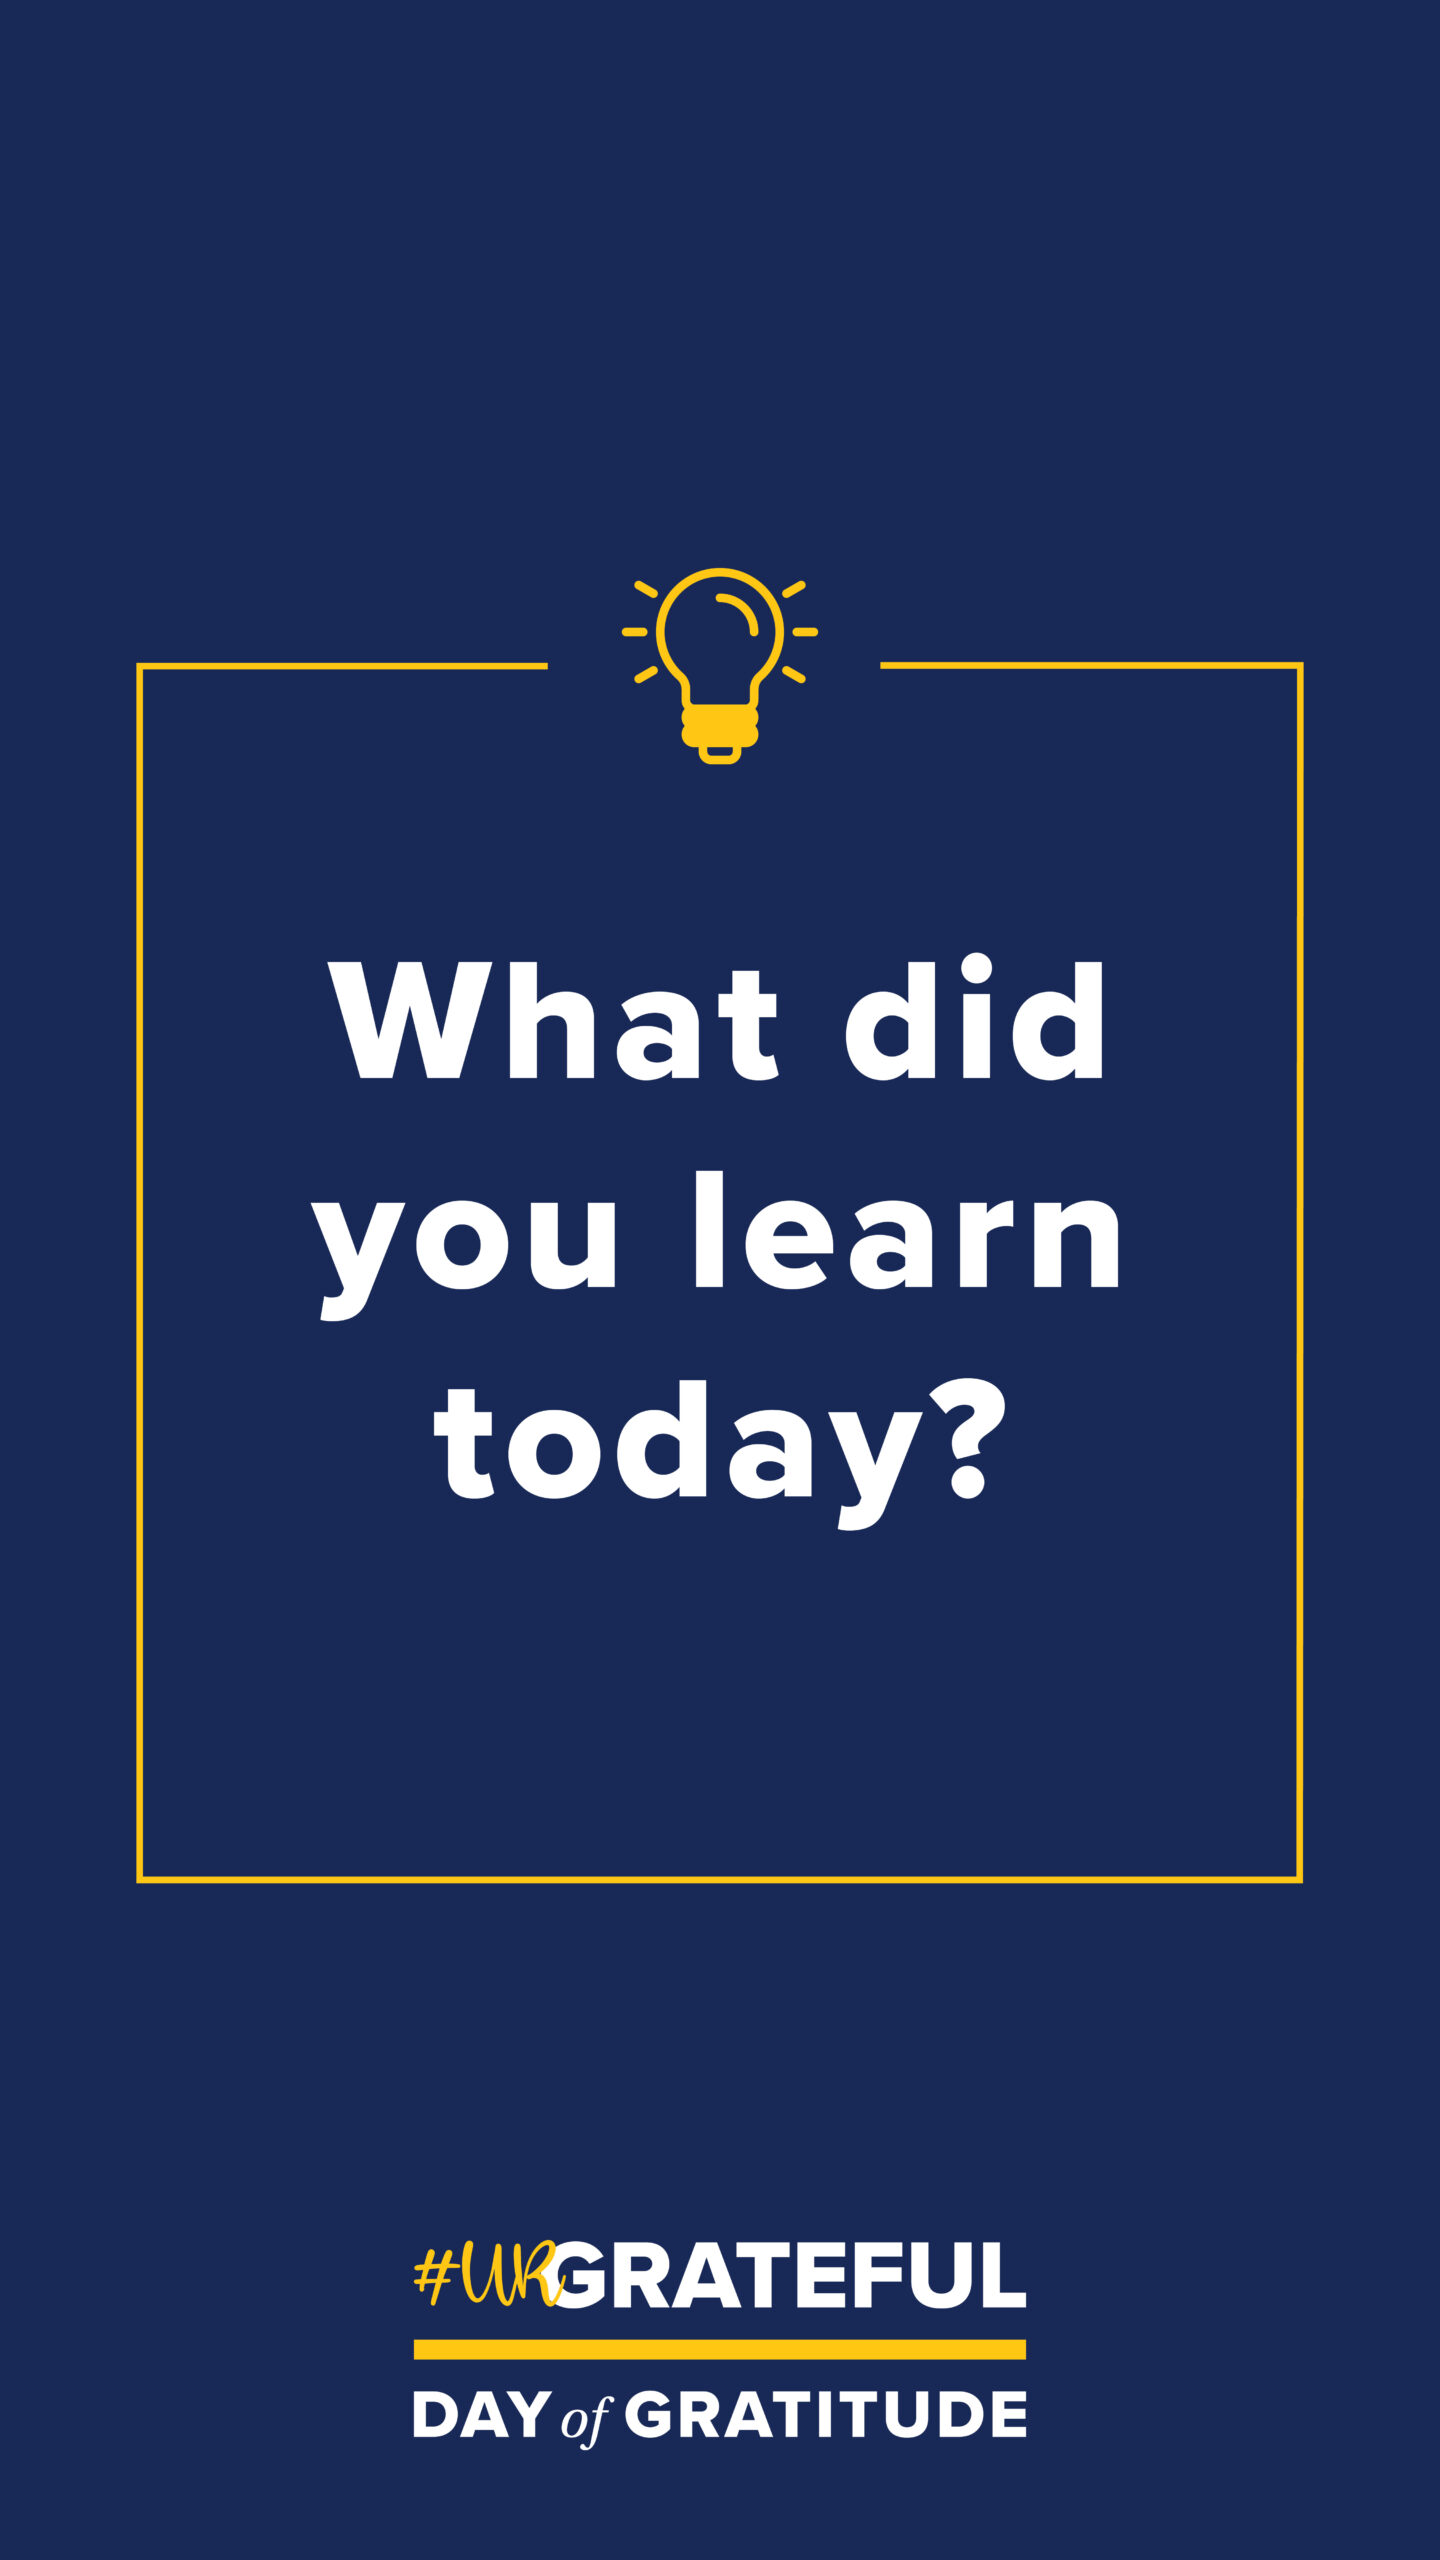 What did you learn today? on navy blue background graphic